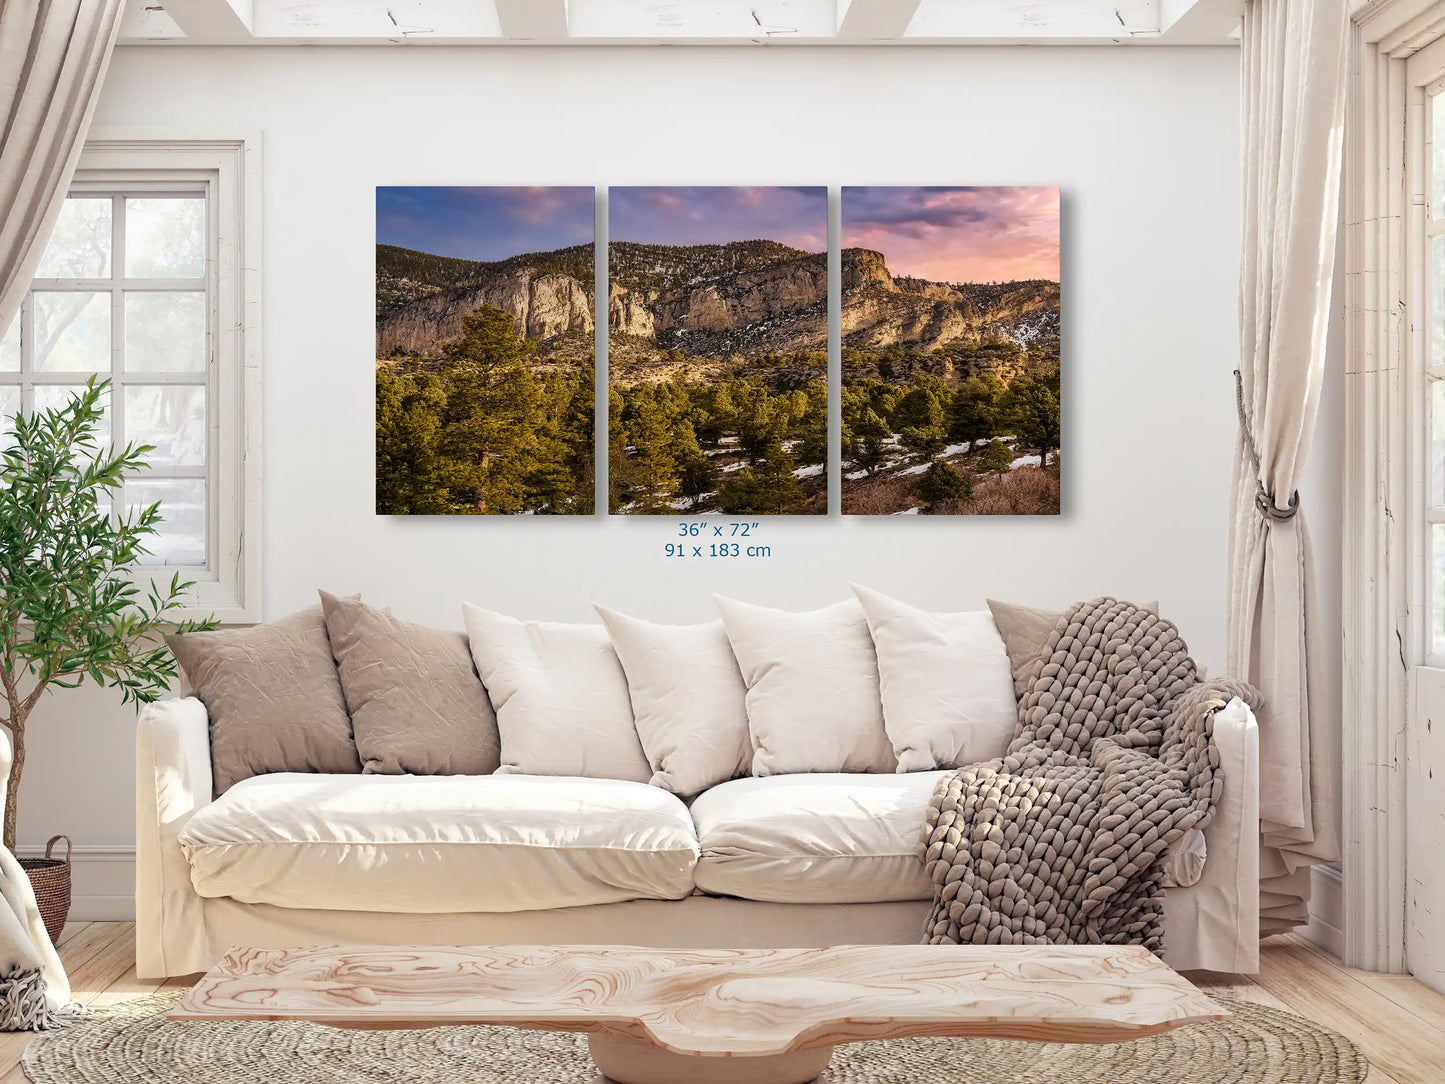 This expansive 36x72 wall art piece of Fletcher Peak at Mt Charleston dominates the living room, its vibrant and heavenly landscape fostering a deep connection with nature.